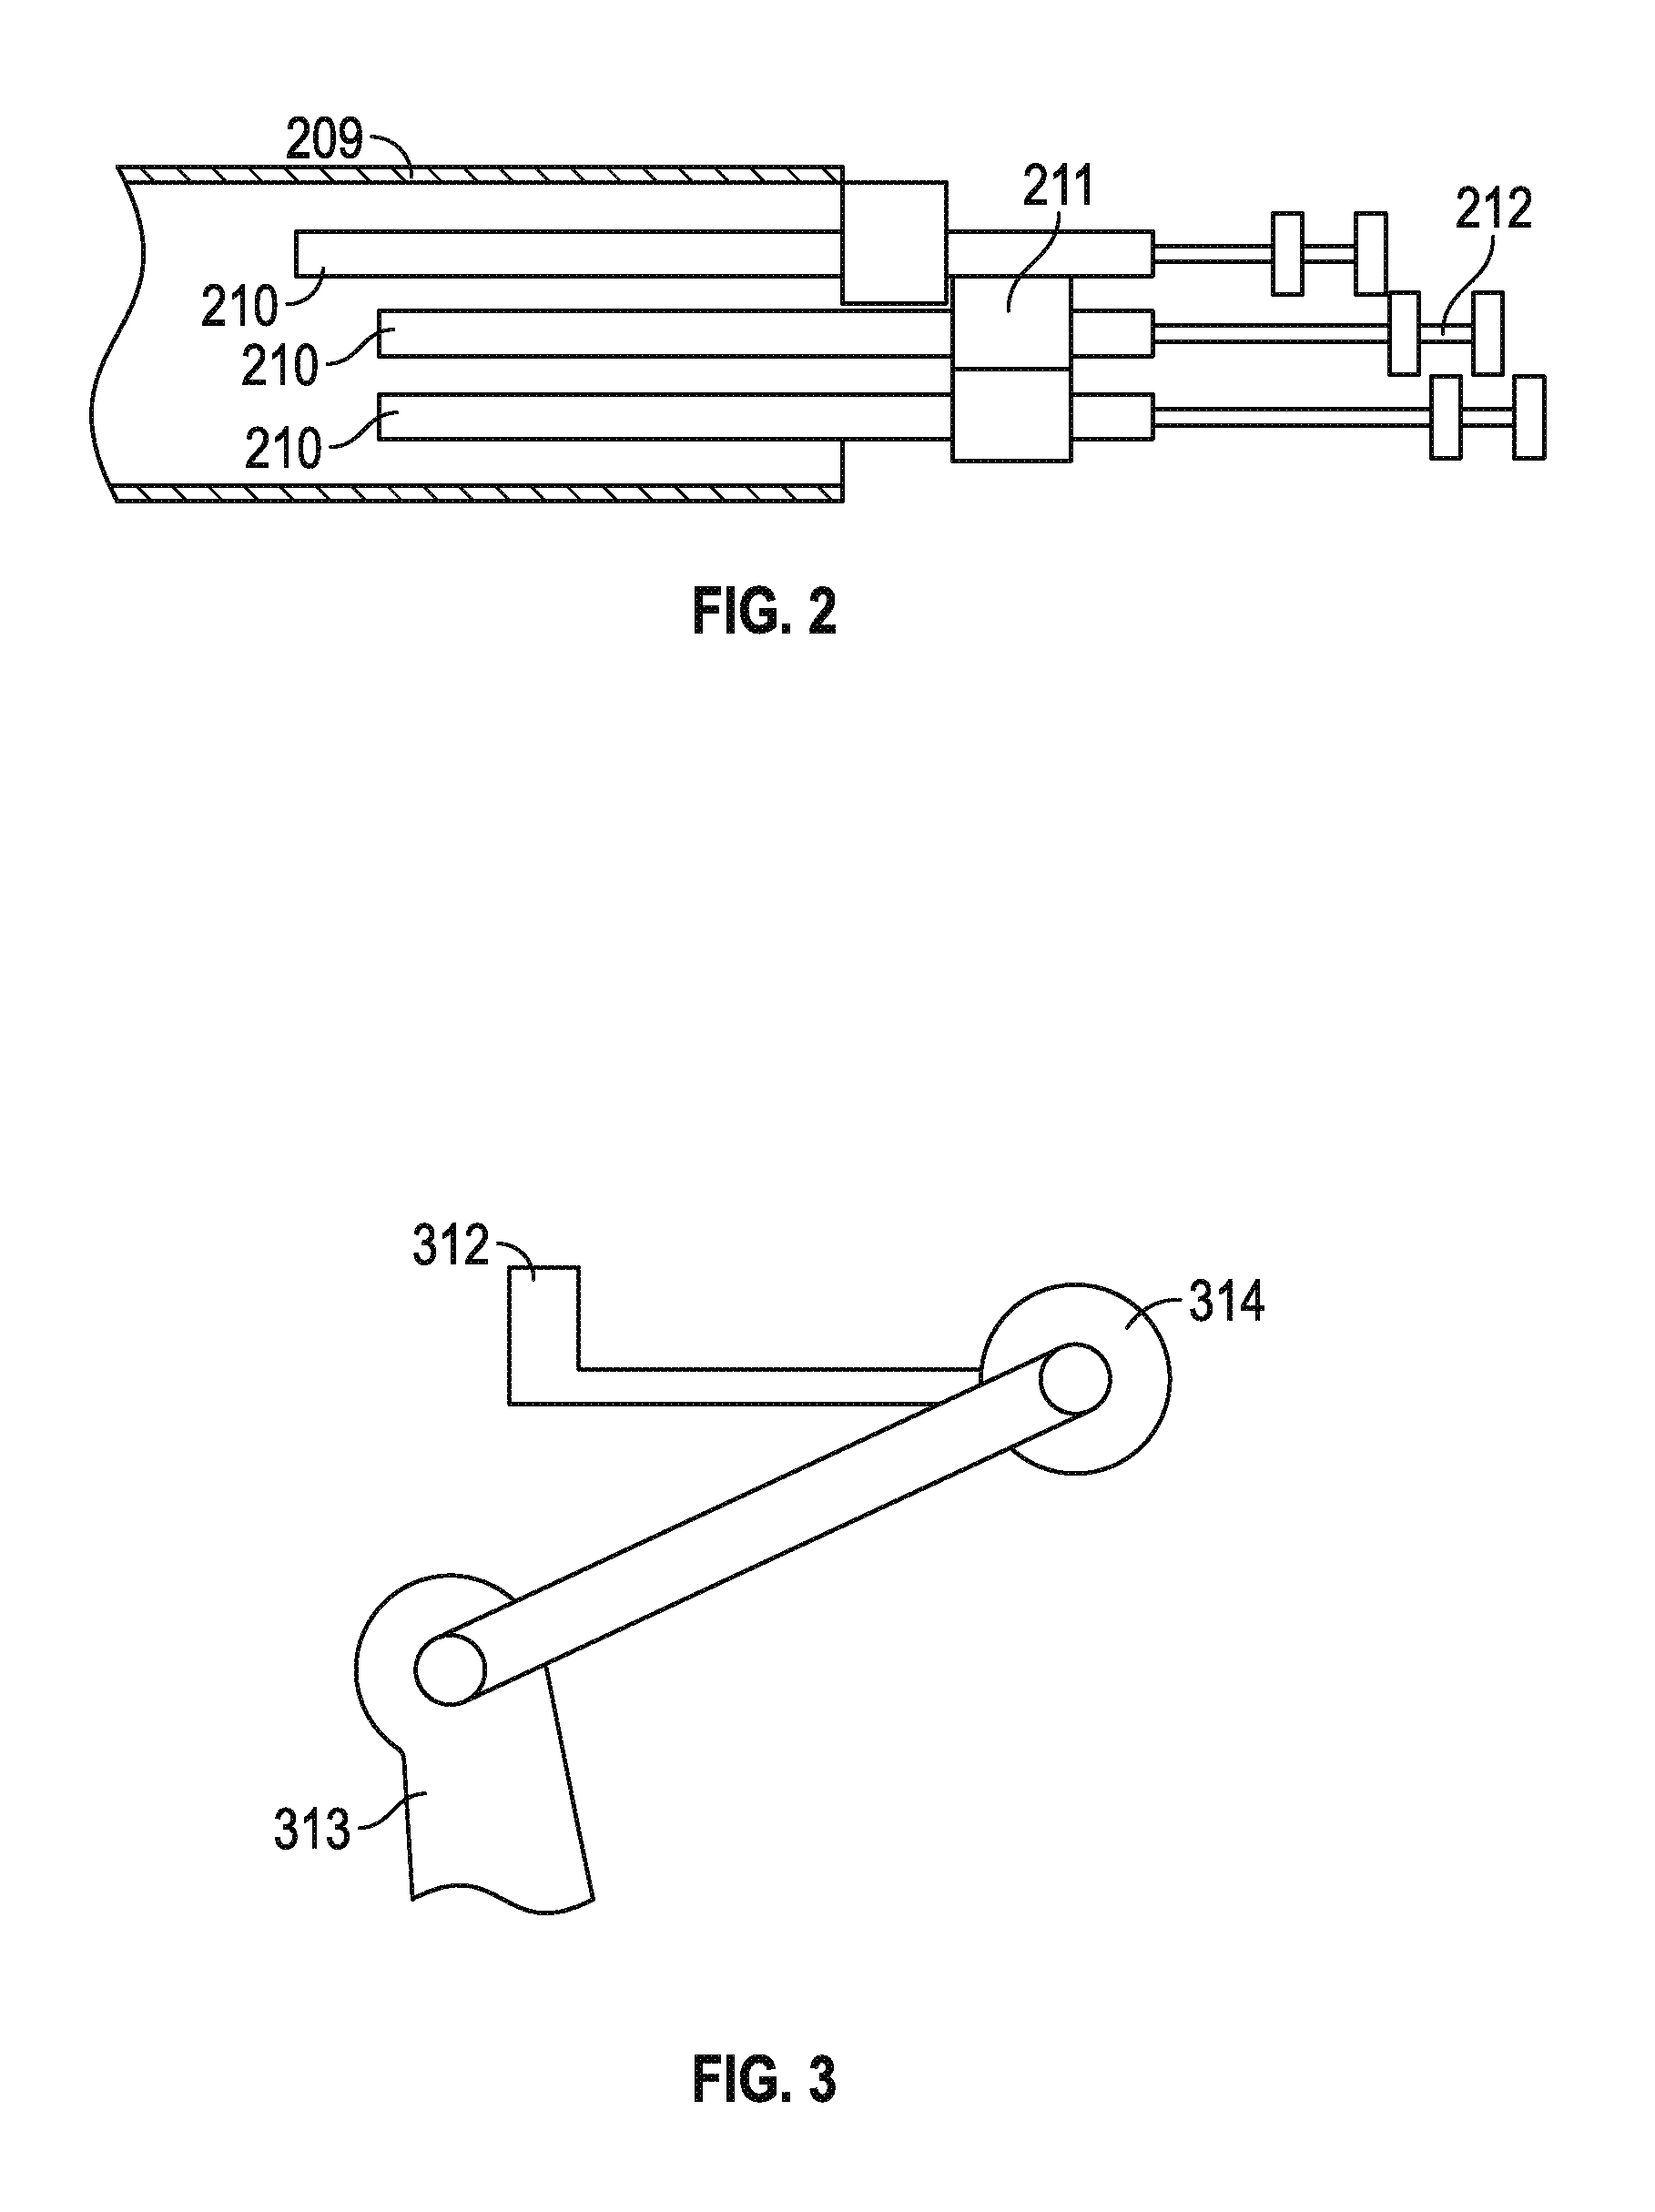 Surgical instrument with multiple instrument interchangeability